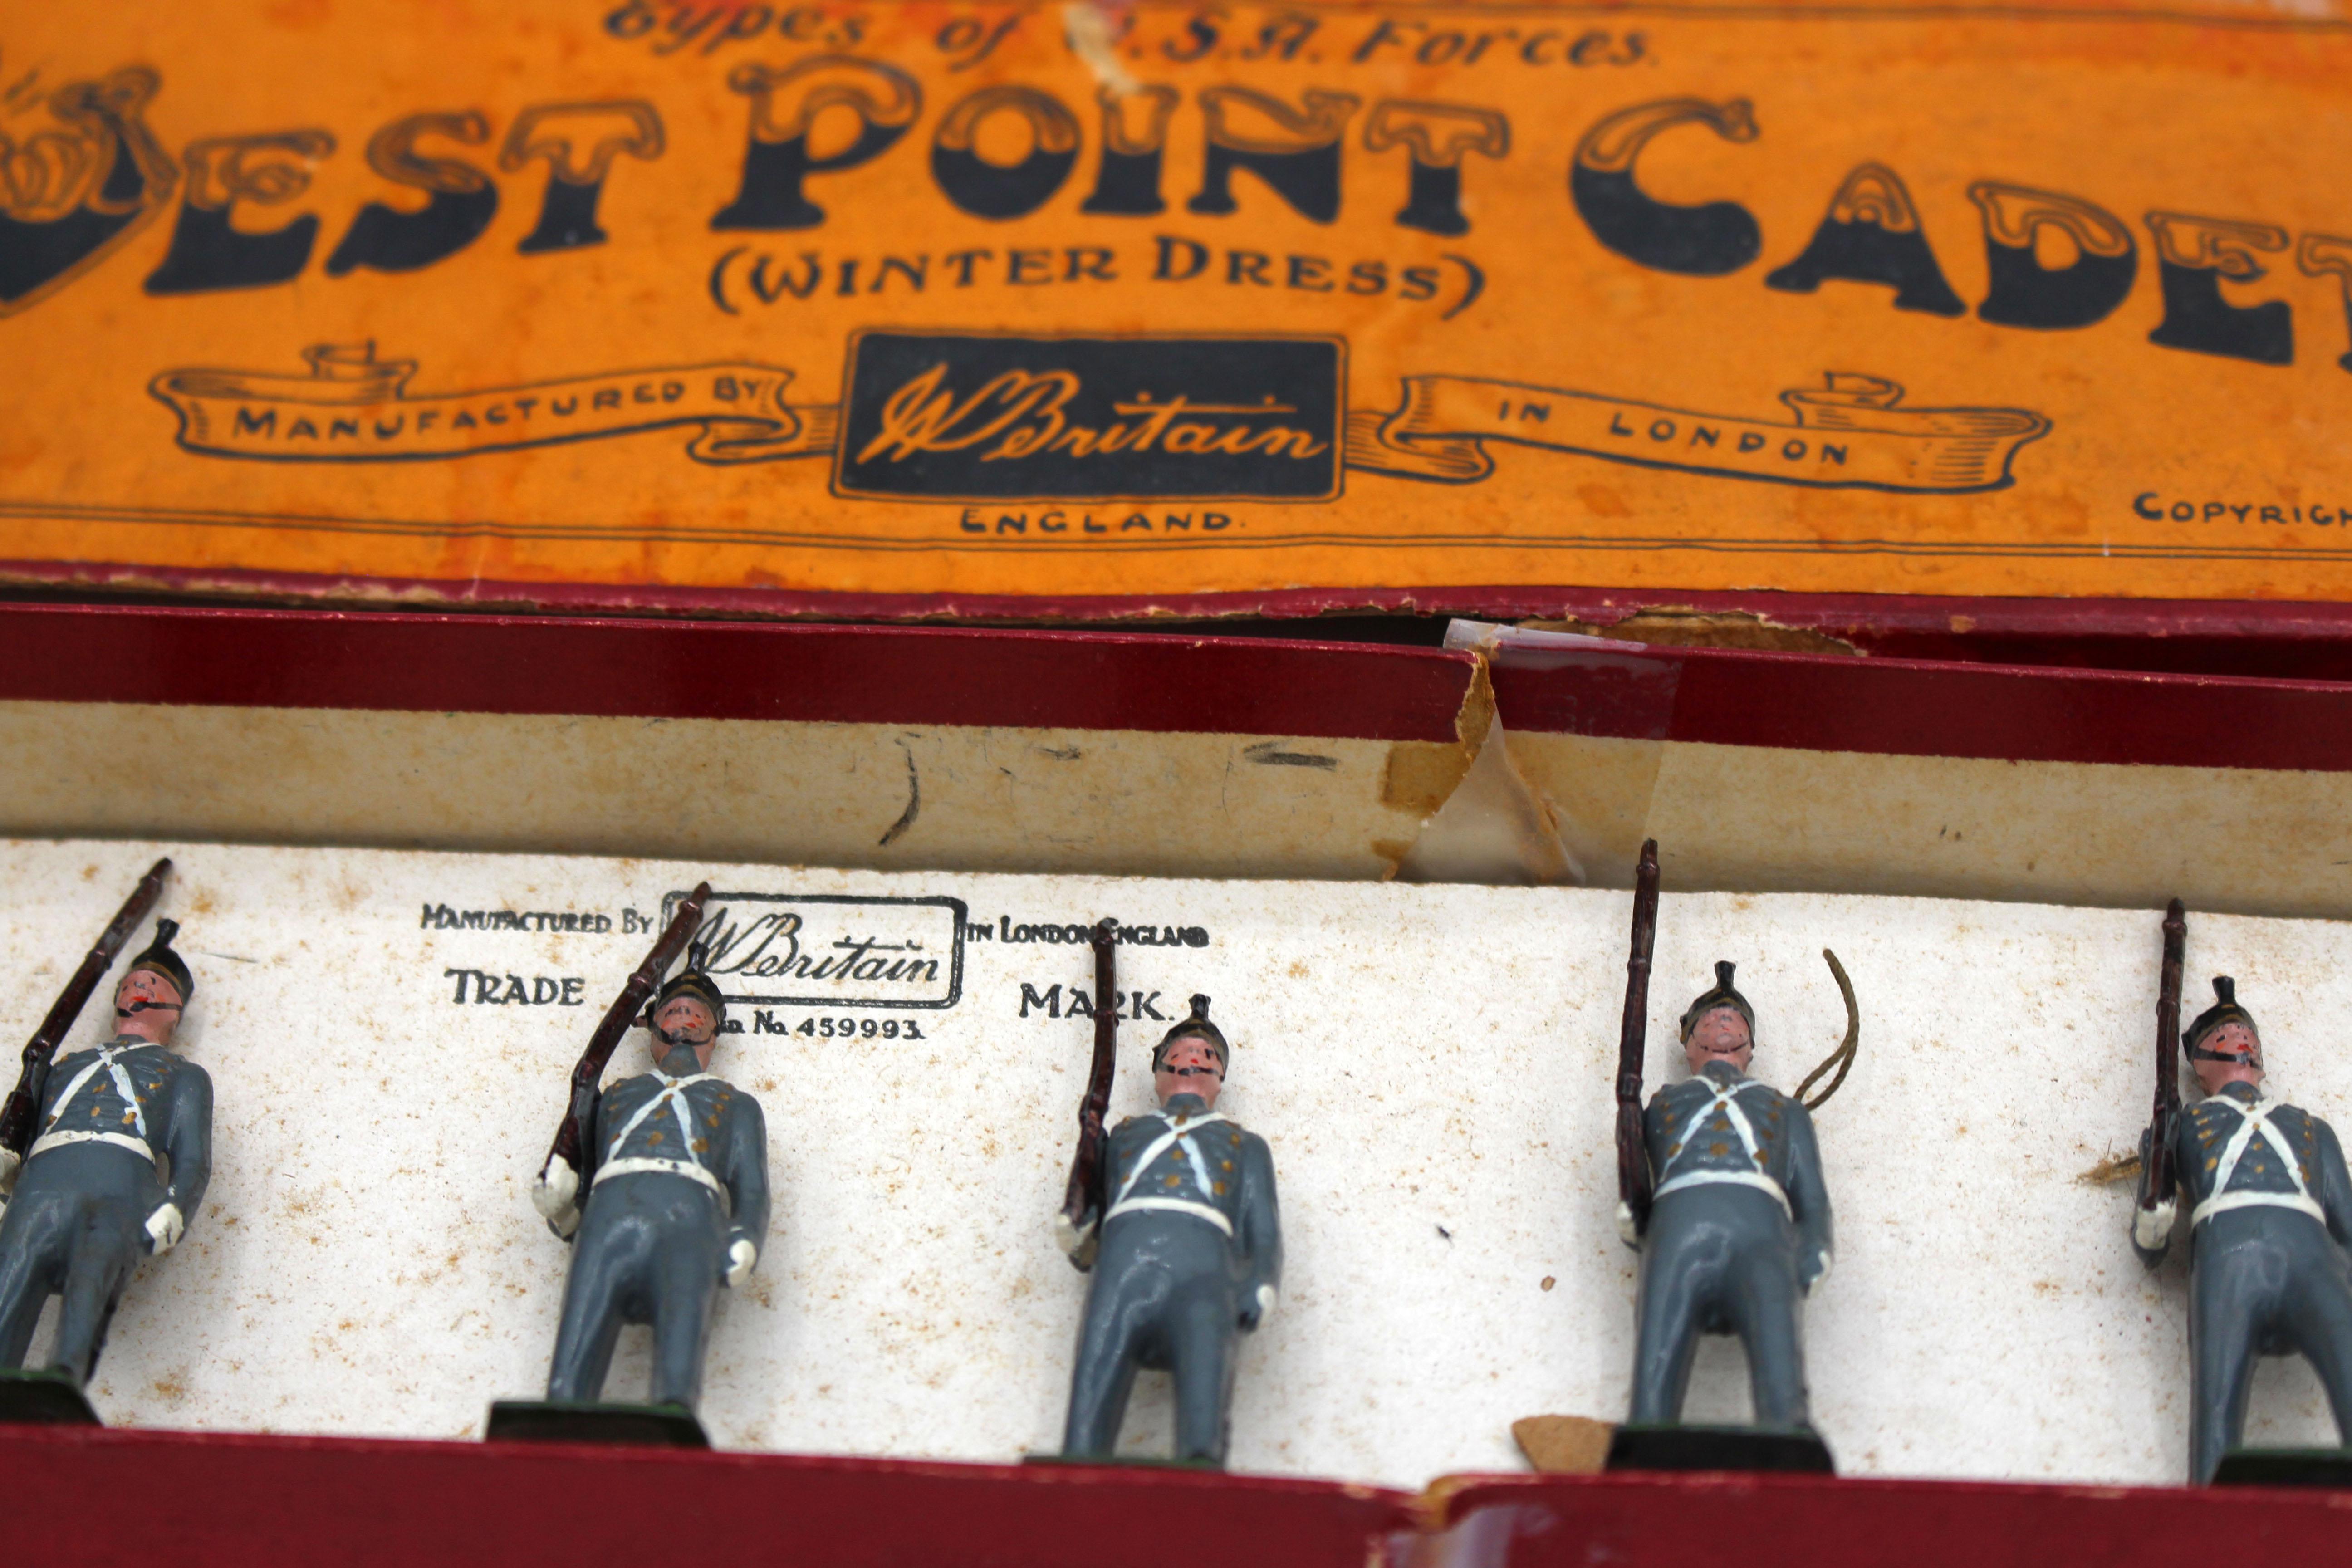 Set of 8 West Point Cadets in box by W. Britain. One with loose arm/rifle. Winter dress. Pre-WWII. Original Whisstock box, as found. Box: 14.75